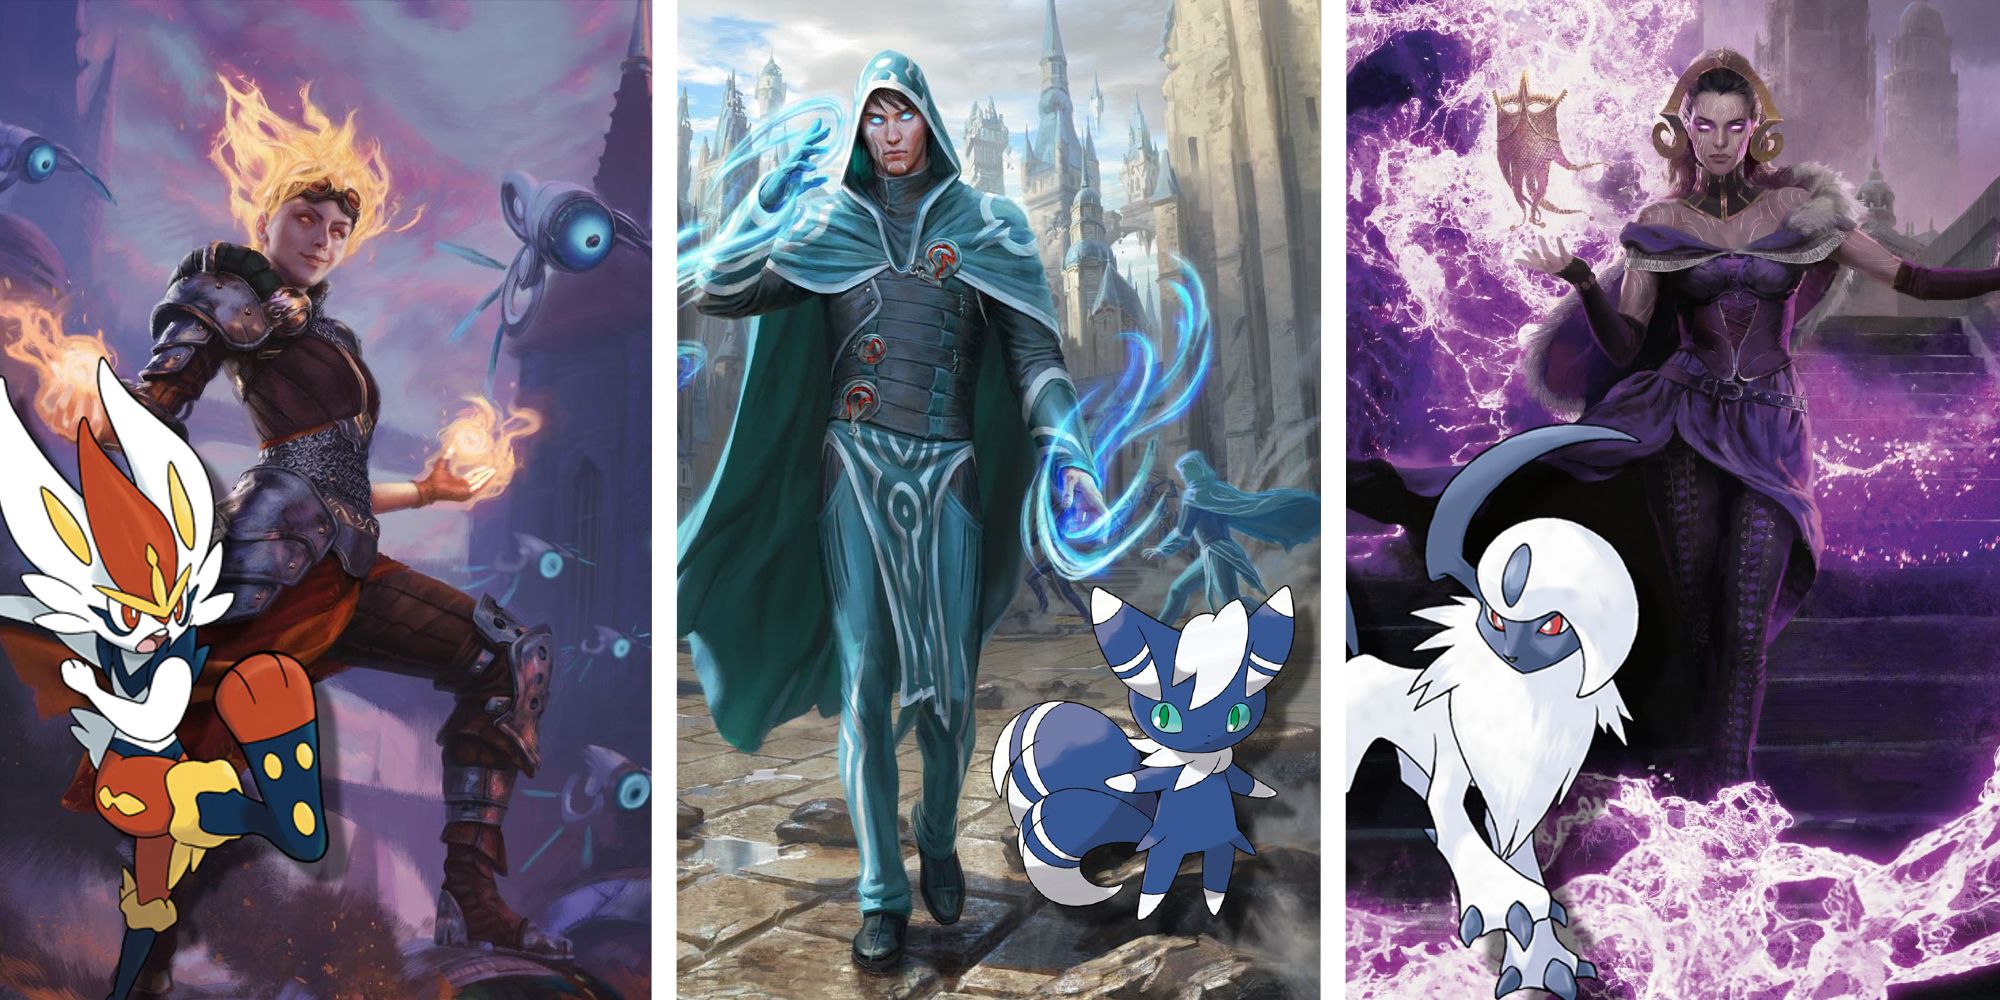 Chandra and Cinderace, Jace and Meowstic, Liliana and Absol